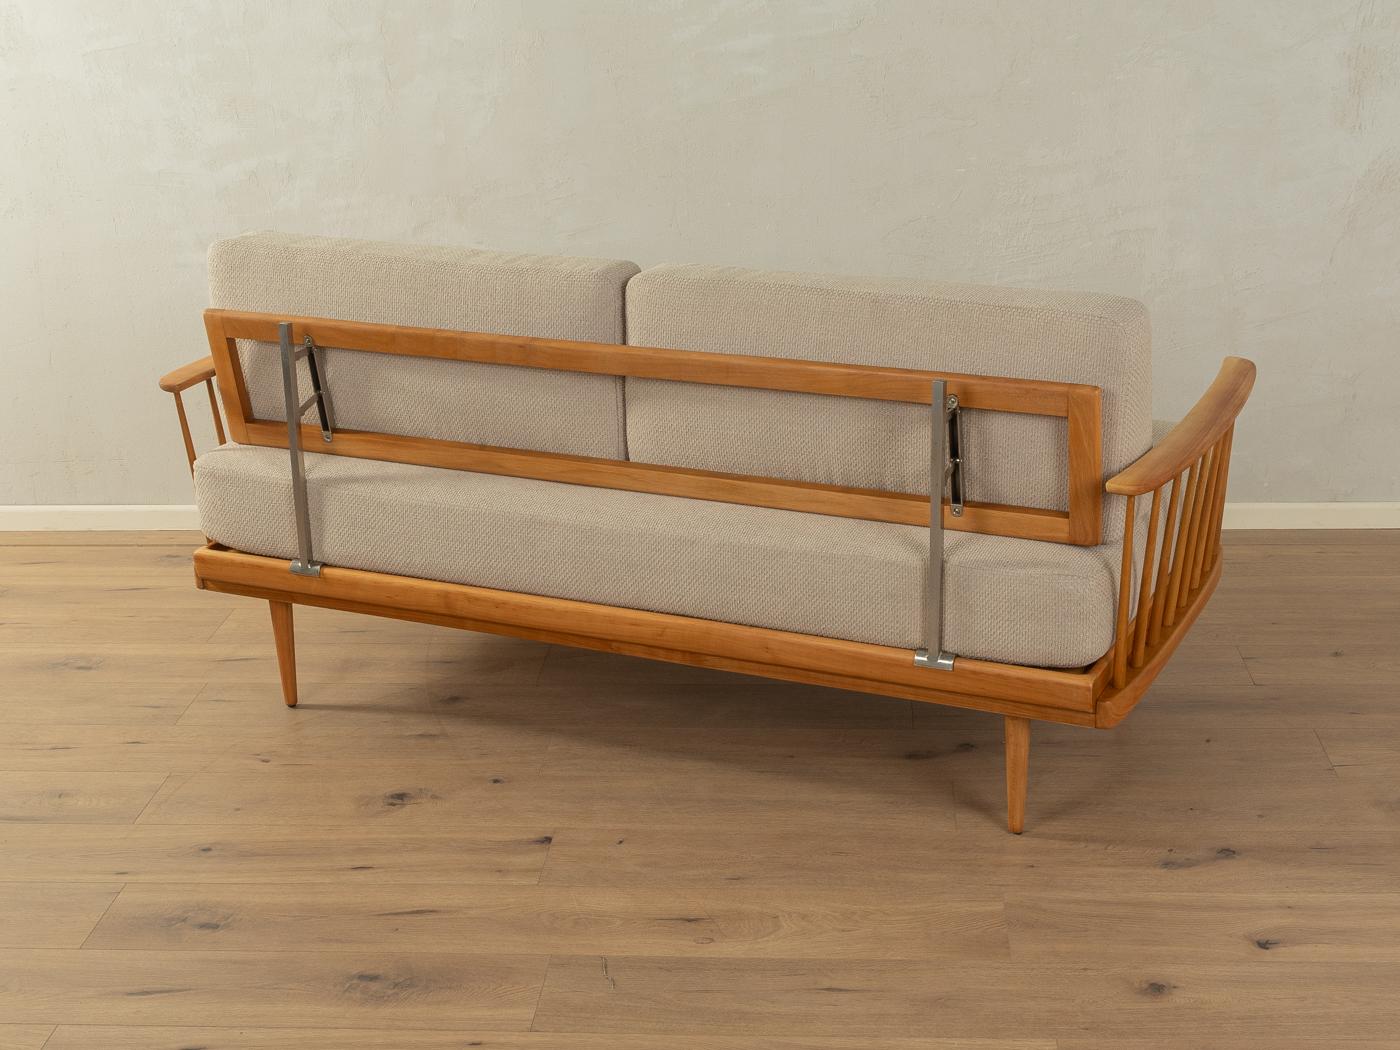  1950s Sofa, Knoll Antimott  In Good Condition For Sale In Neuss, NW